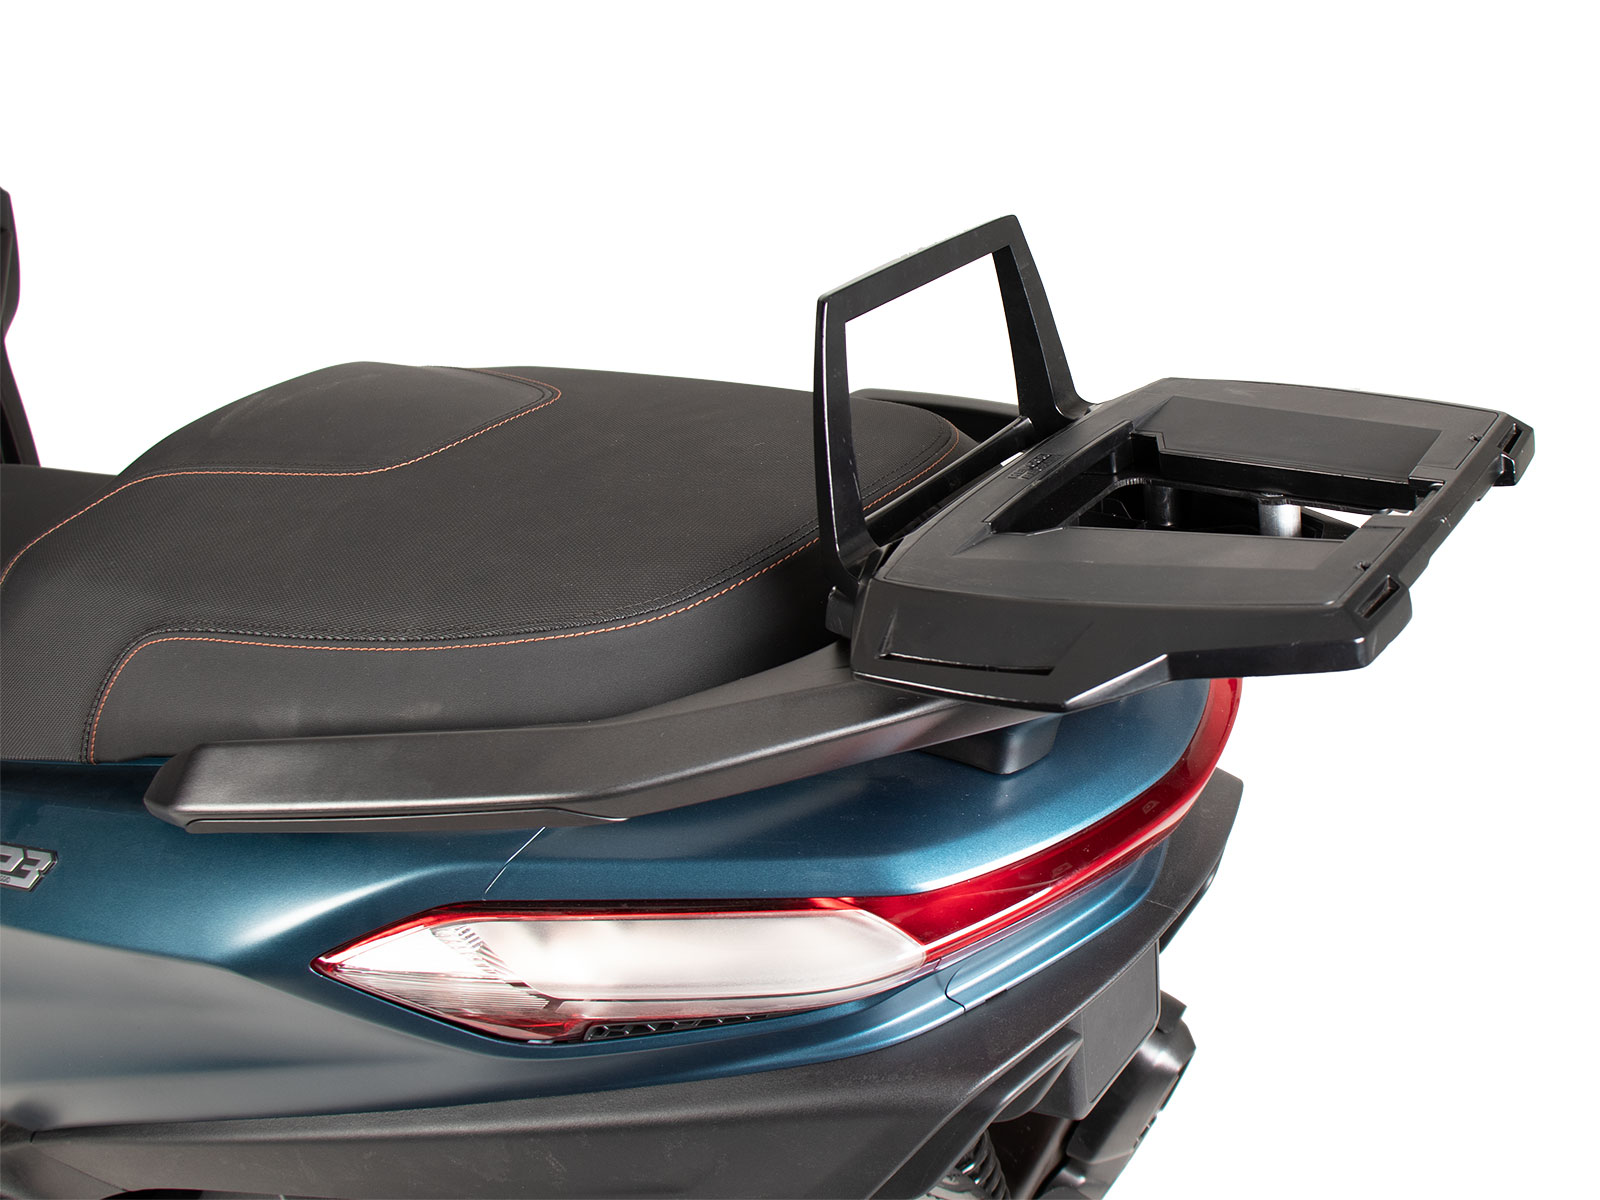 Alurack top case carrier black for combination with original rear rack for Piaggio MP3 Exclusive 530